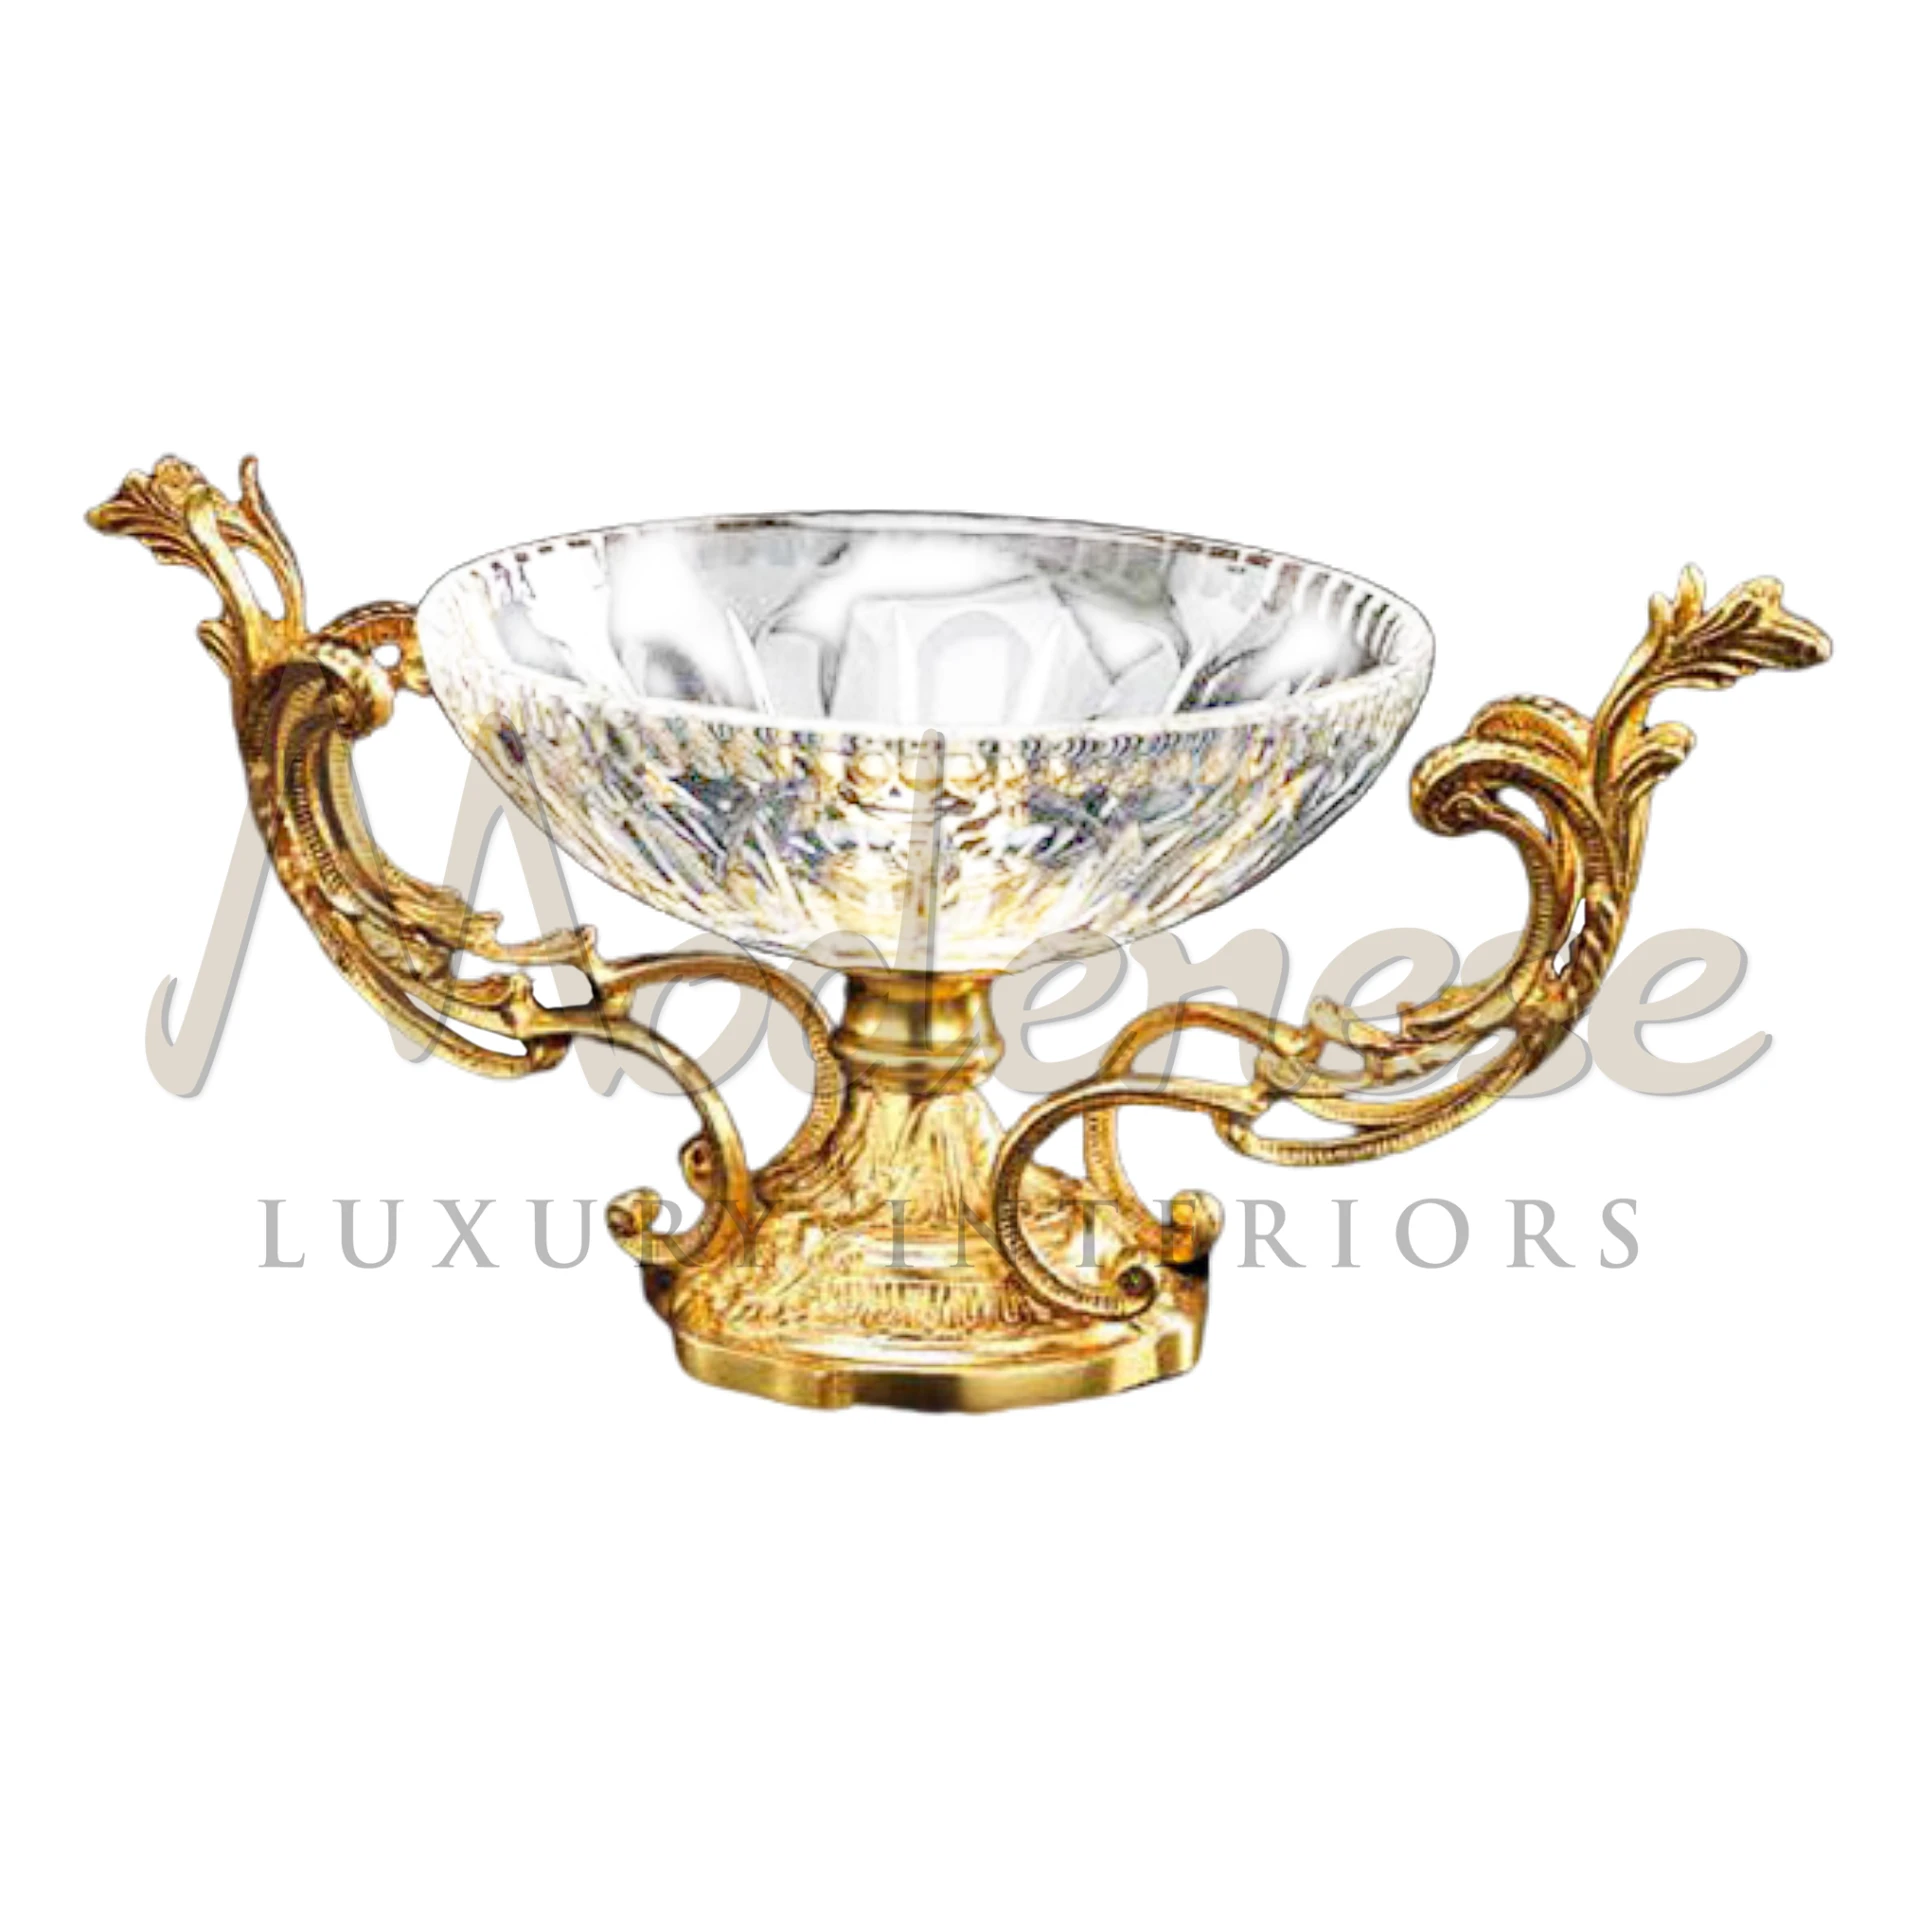 Elegant Glass Gold Elements Bowl, a luxury vase with sophisticated design, ideal for adding glamour to interiors.